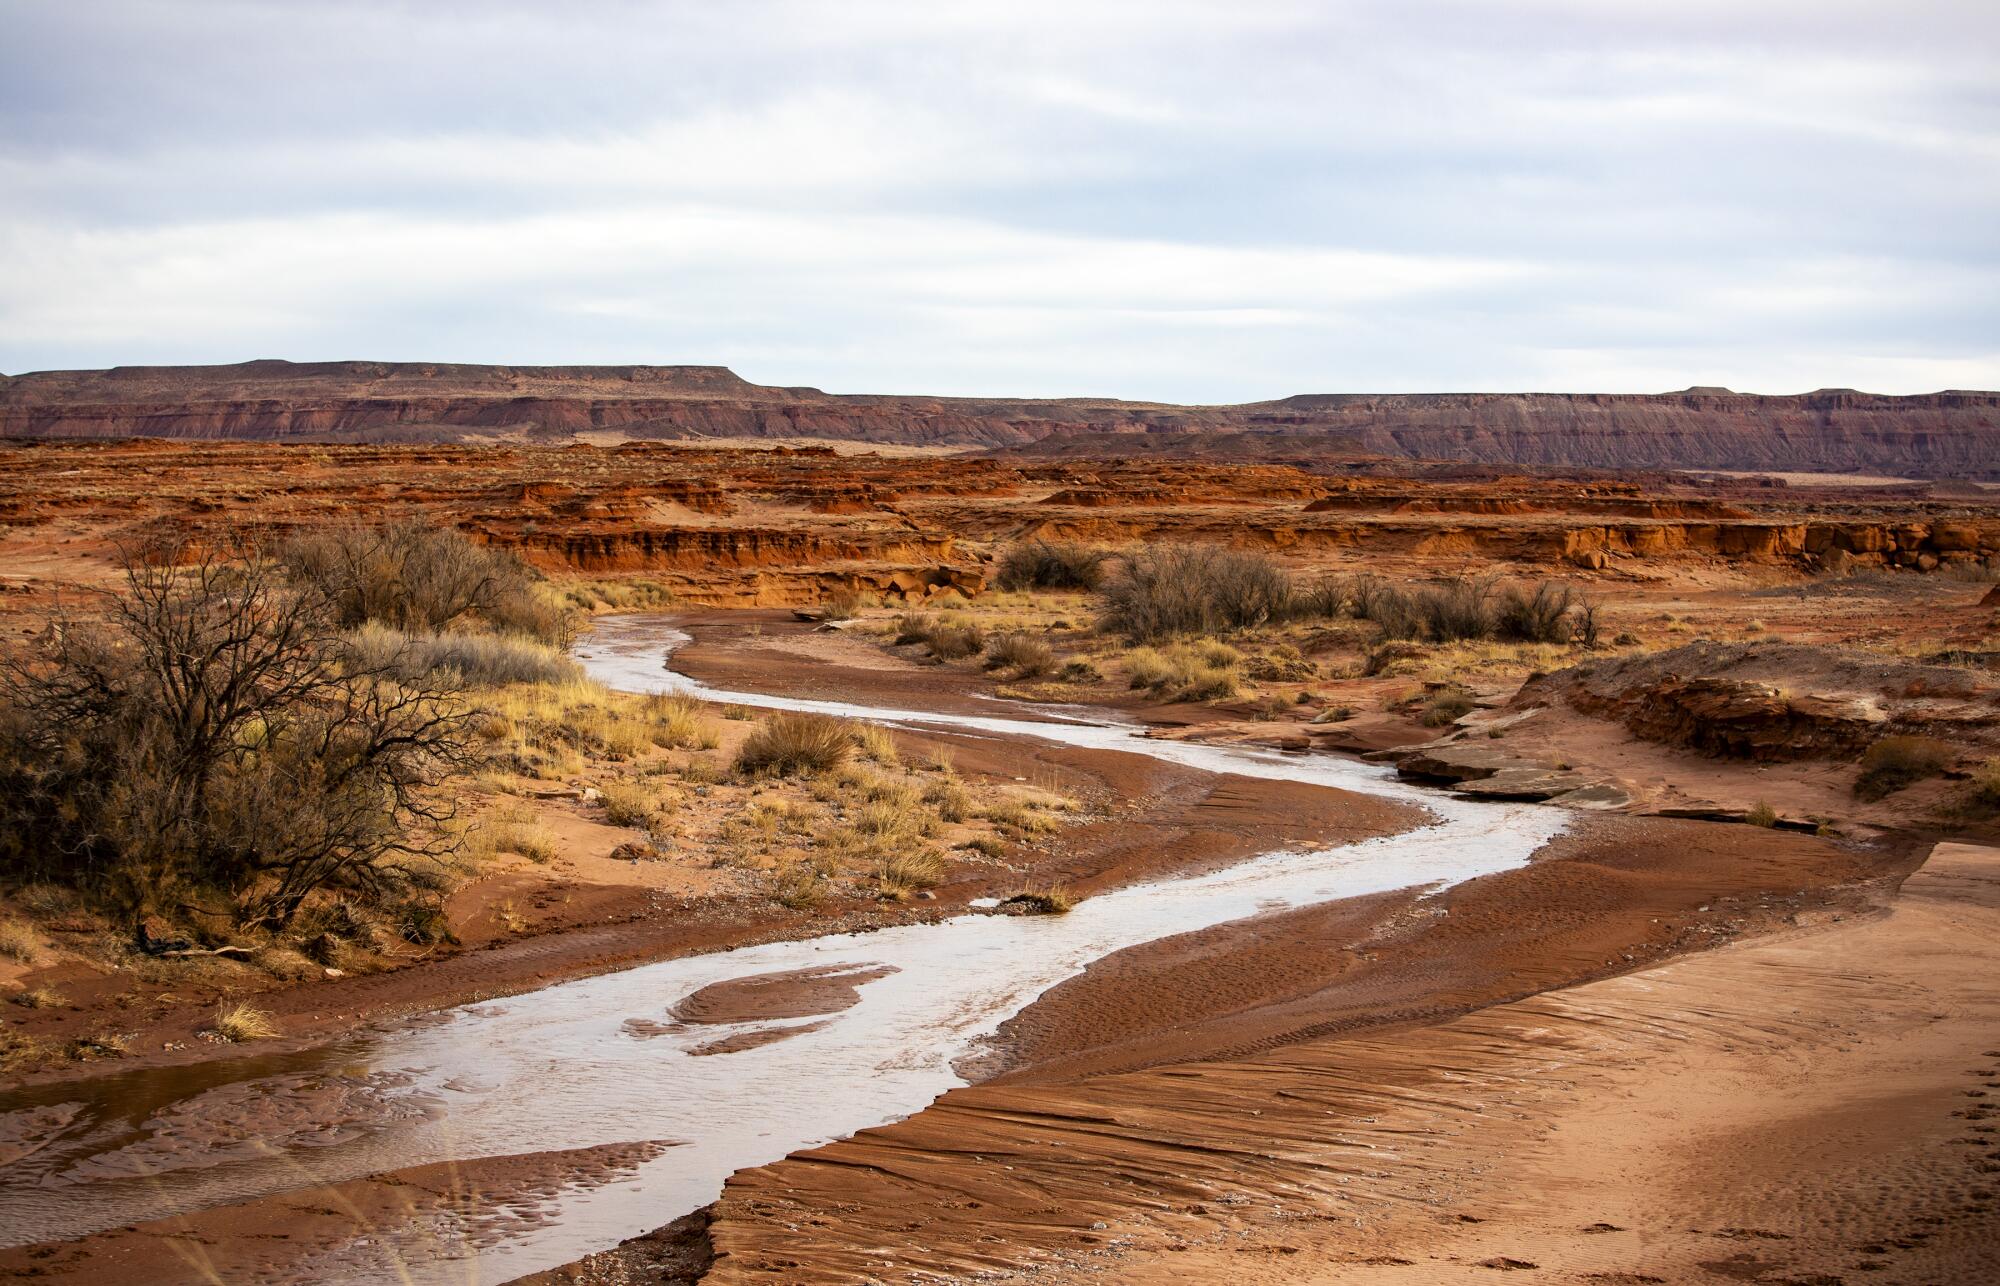 Water flows on the arid Navajo Reservation.